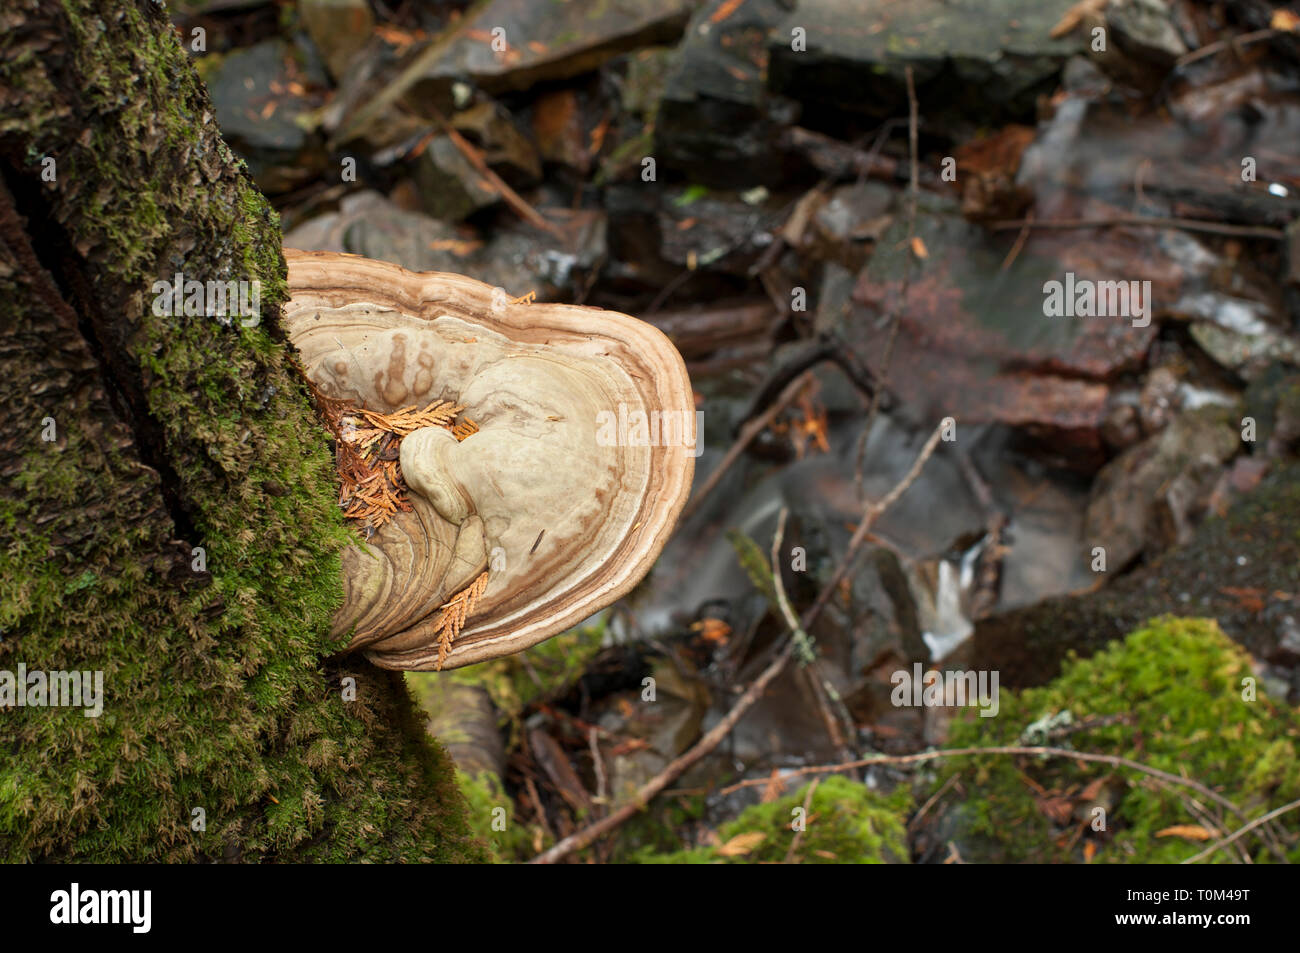 Looking down on circular fungus and lichen/moss growing on a tree trunk in a forest with mountain stream in background Stock Photo